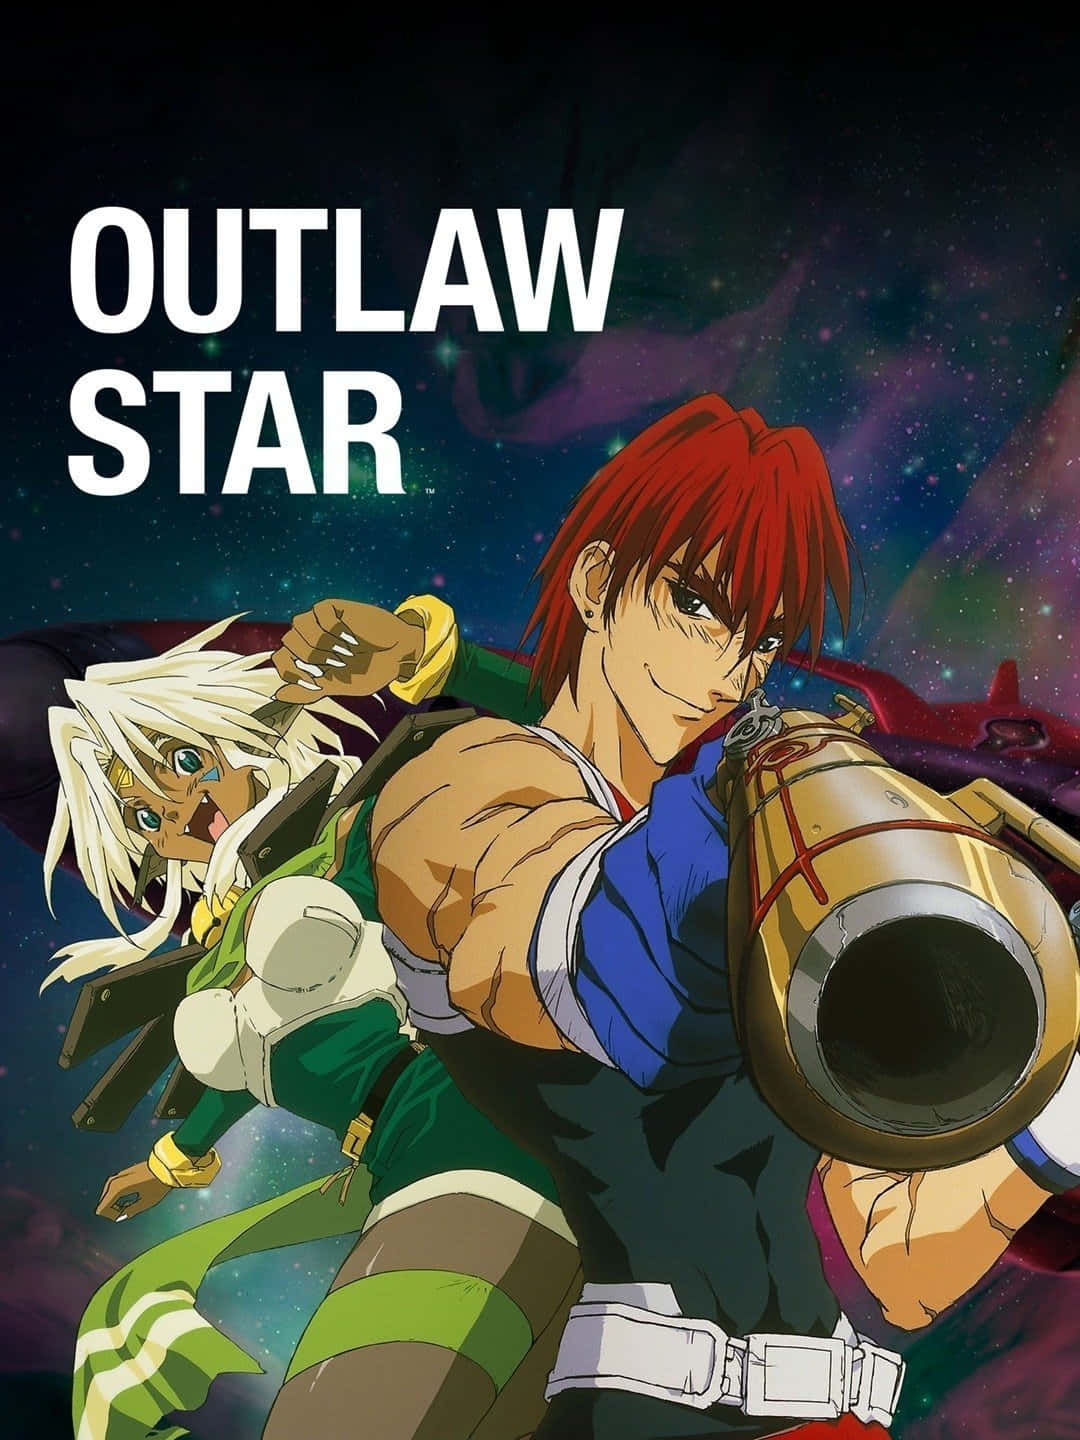 Aja and Melphina, two central characters of the 1998 anime series Outlaw Star Wallpaper